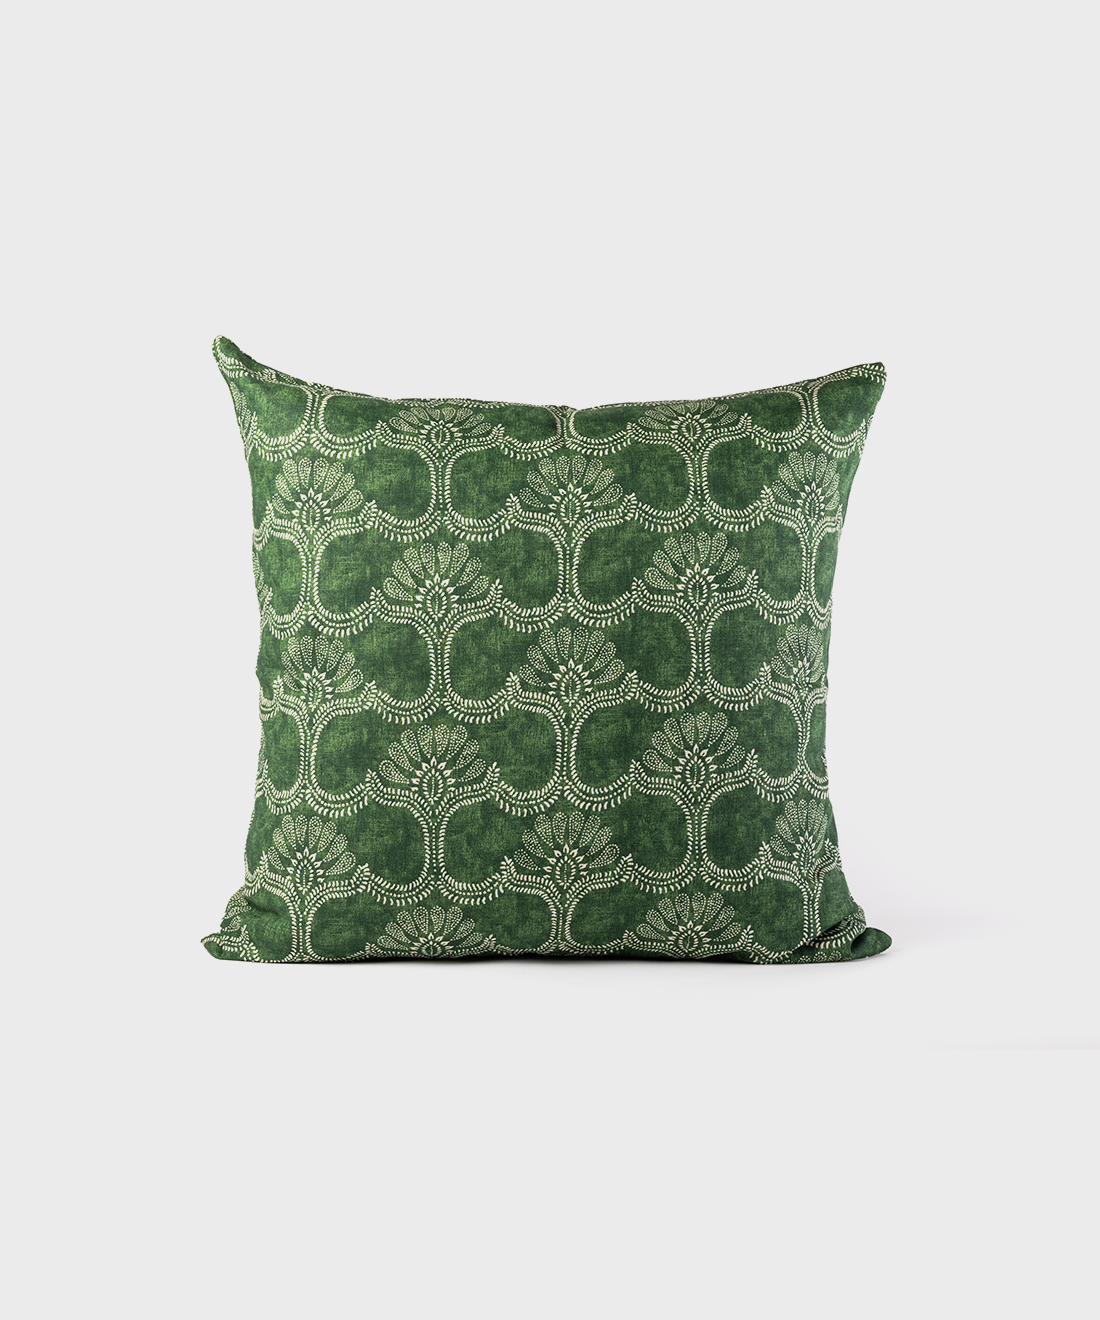 Arabesque Scatter Cushion in Green